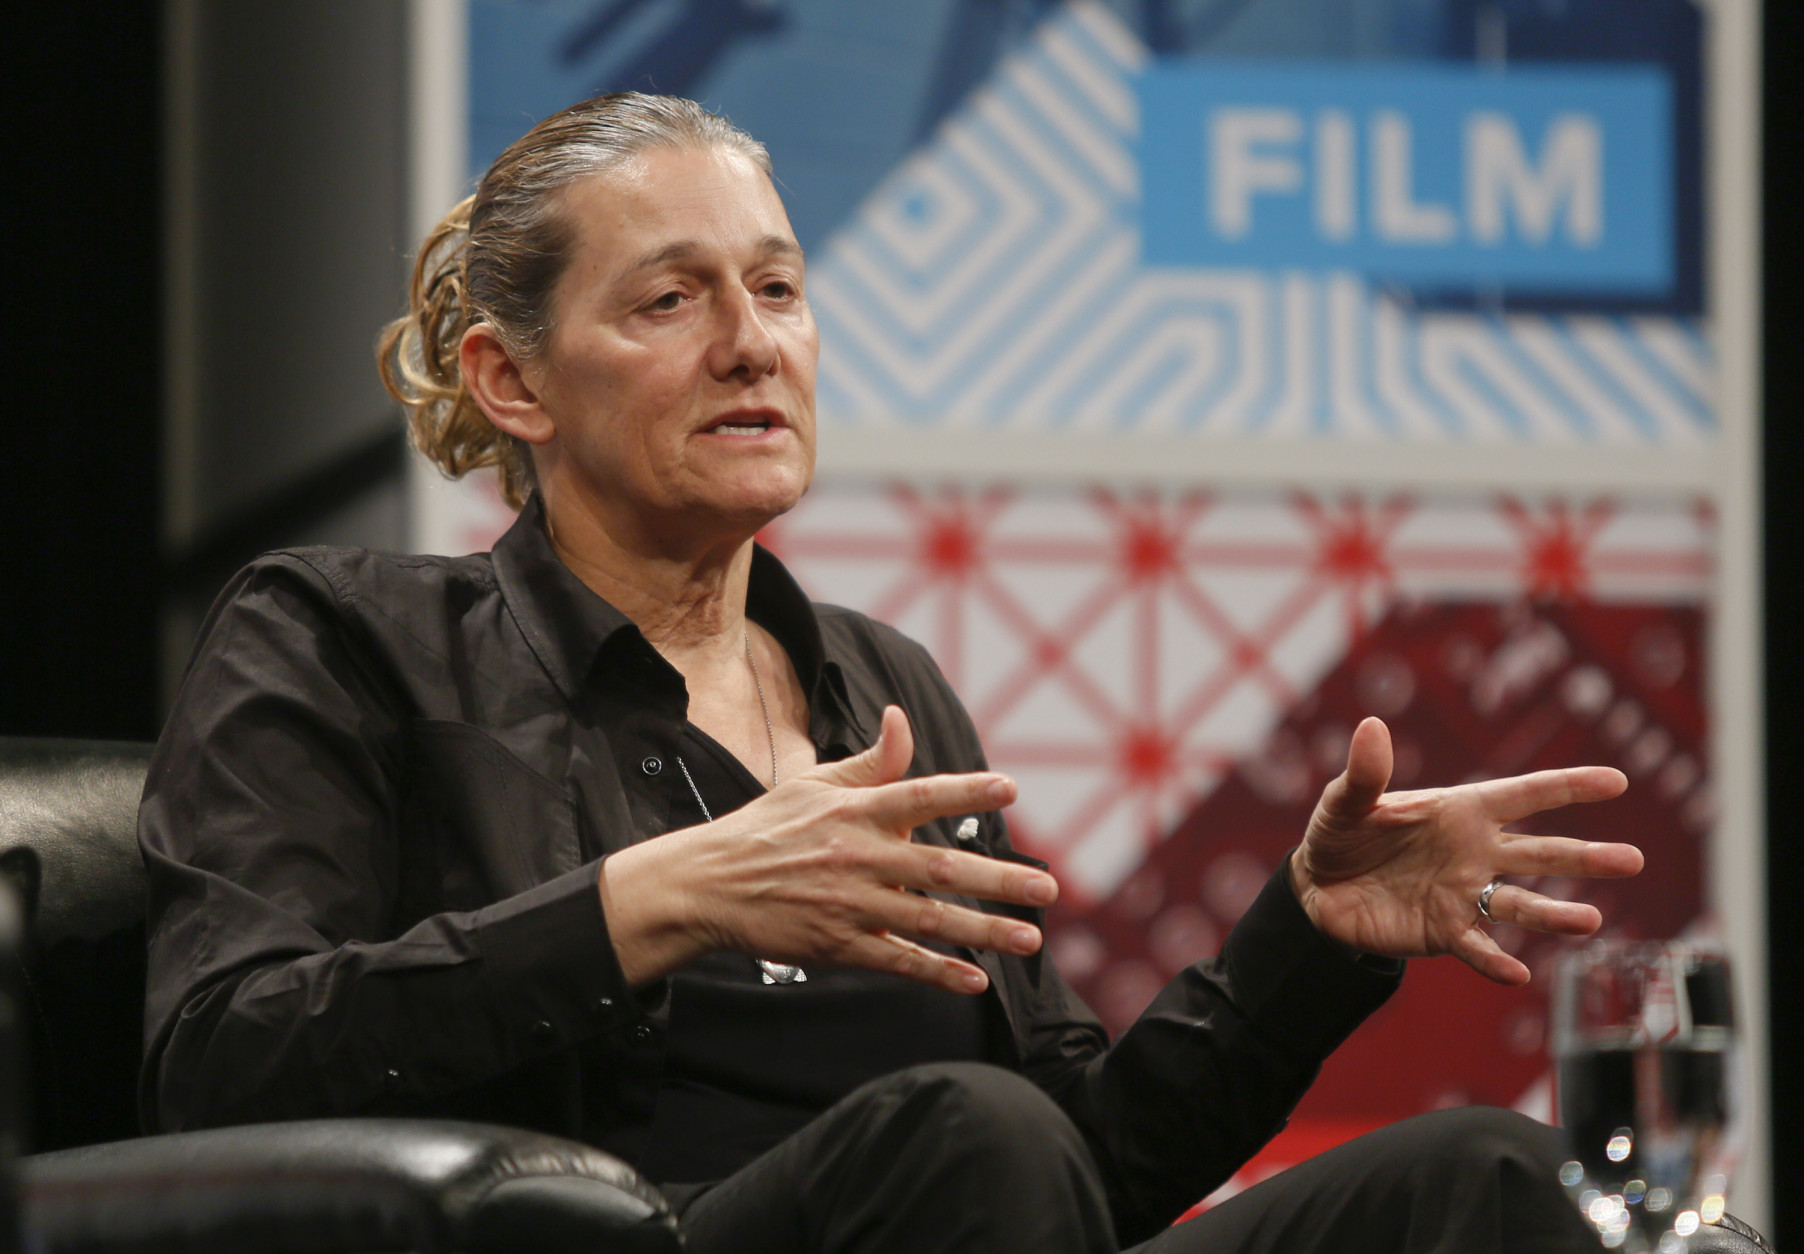 United Therapeutics CEO Martine Rothblatt  gives a keynote on AI, Immortality and the Future of Selves during the SXSW Interactive Festival on Saturday, March 14, 2015 in Austin, Texas.  (AP Photo/Jack Plunkett)